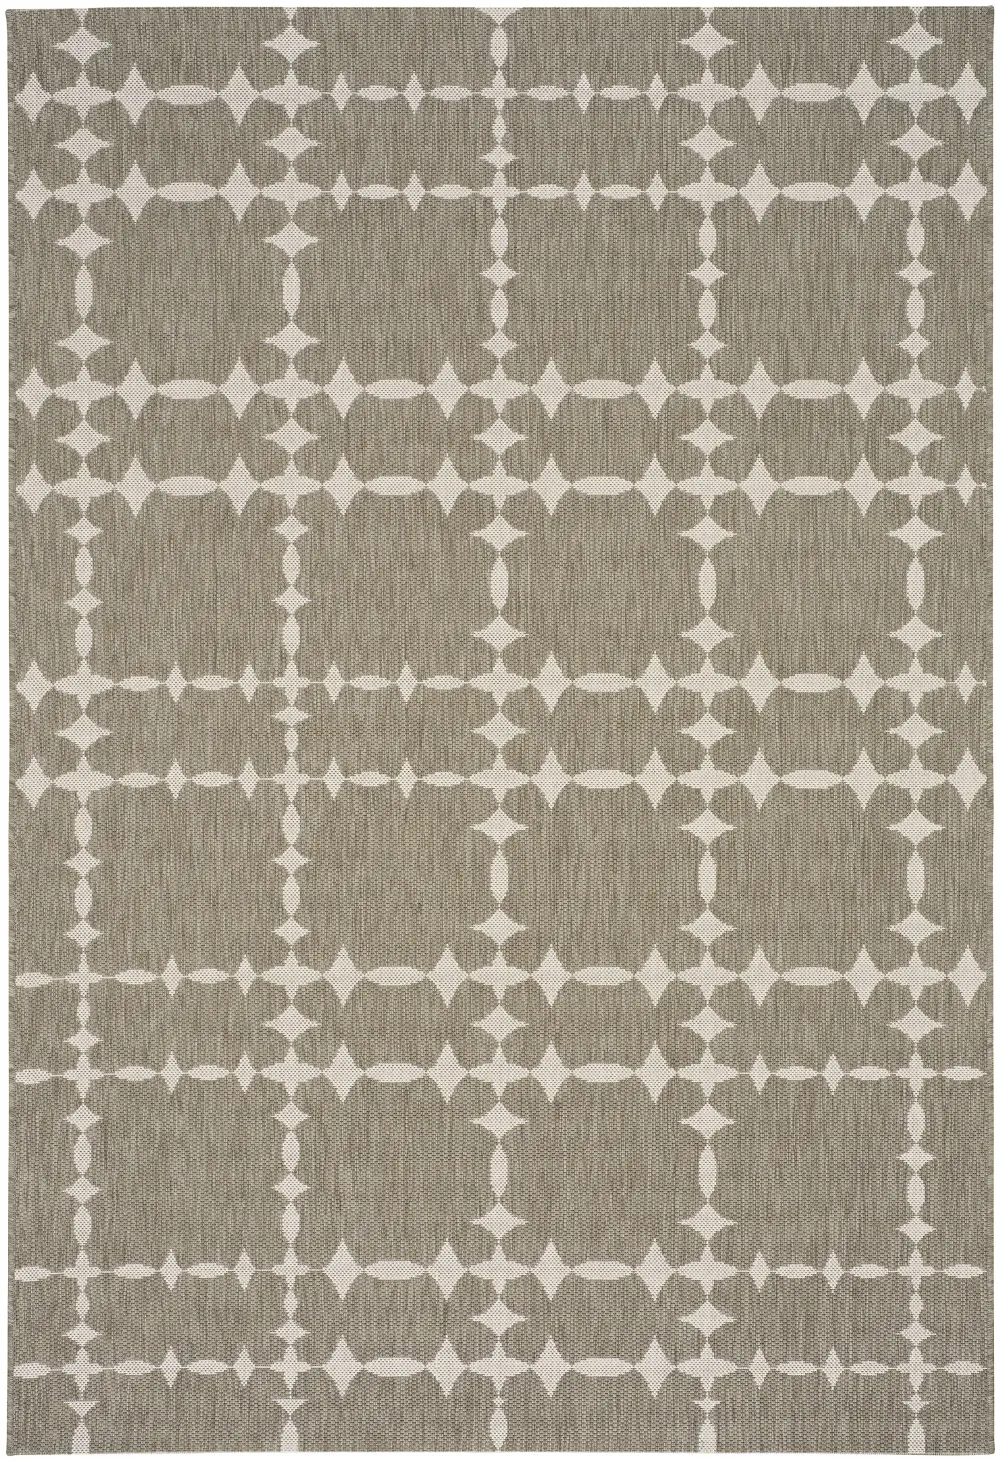 4738RS07101100675 8 x 11 Large Barley Tan Indoor-Outdoor Rug - Finesse-Tower Court-1